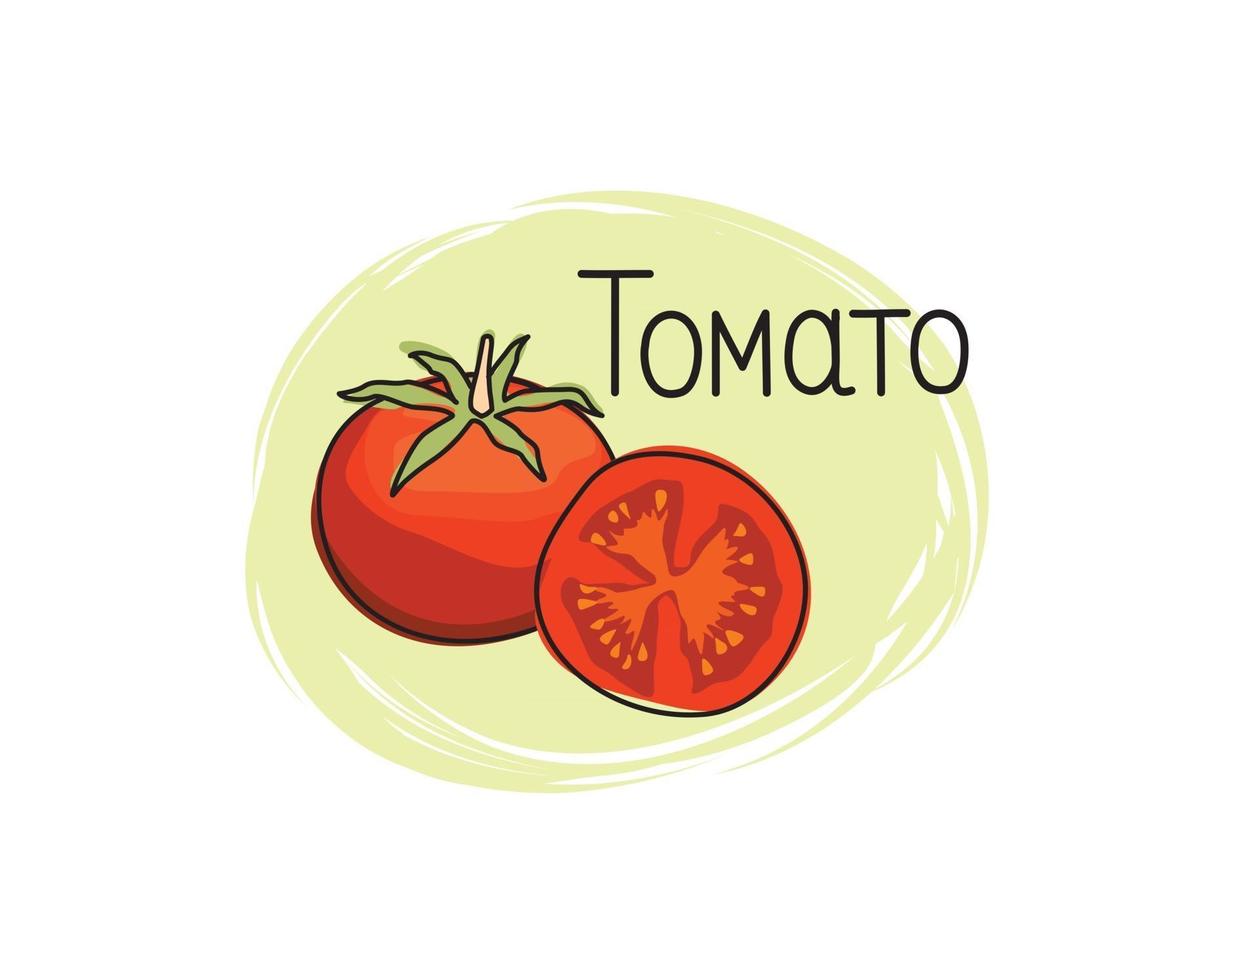 Red tomato icon. Full and sliced tomato isolated on white background with lettering Tomato. Vegetable stylish drawn symbol tomato vector